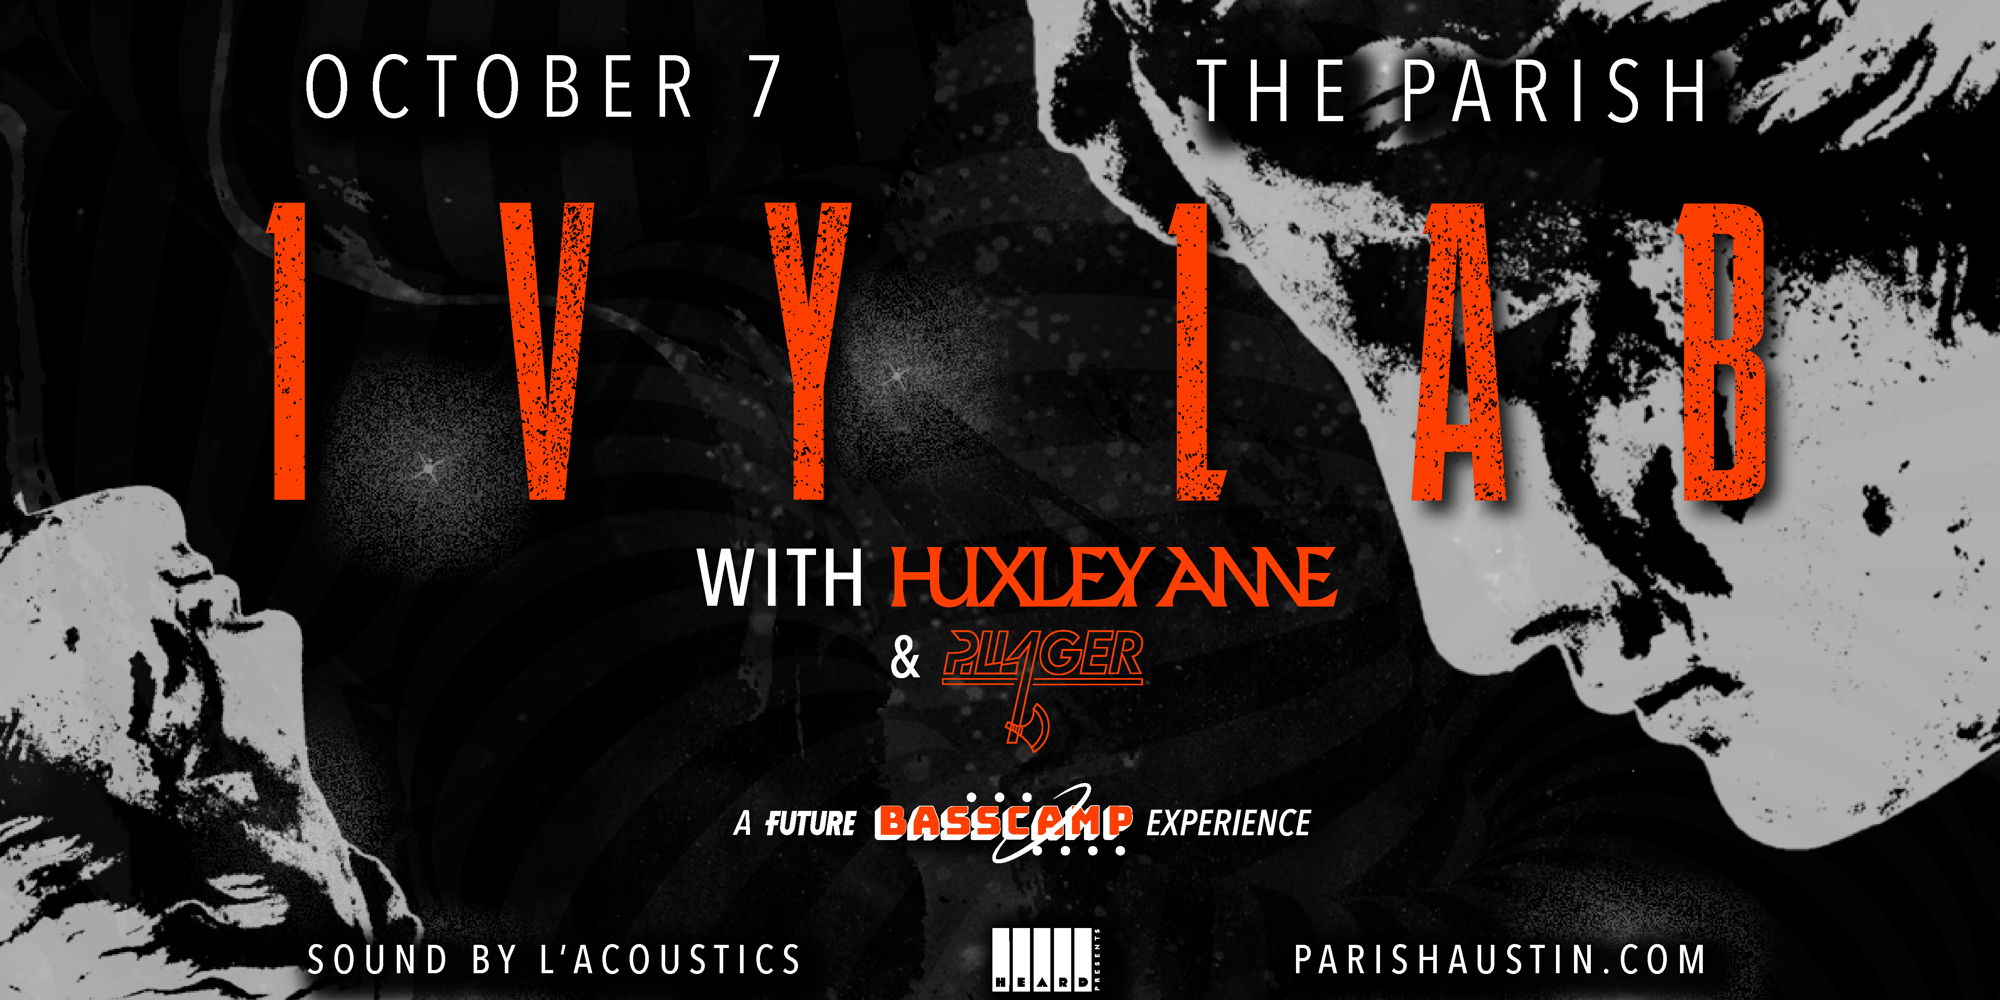 Ivy Lab w/ Huxley Anne and Pillager - A Future Bass Camp Experience at The Parish 10/7 promotional image